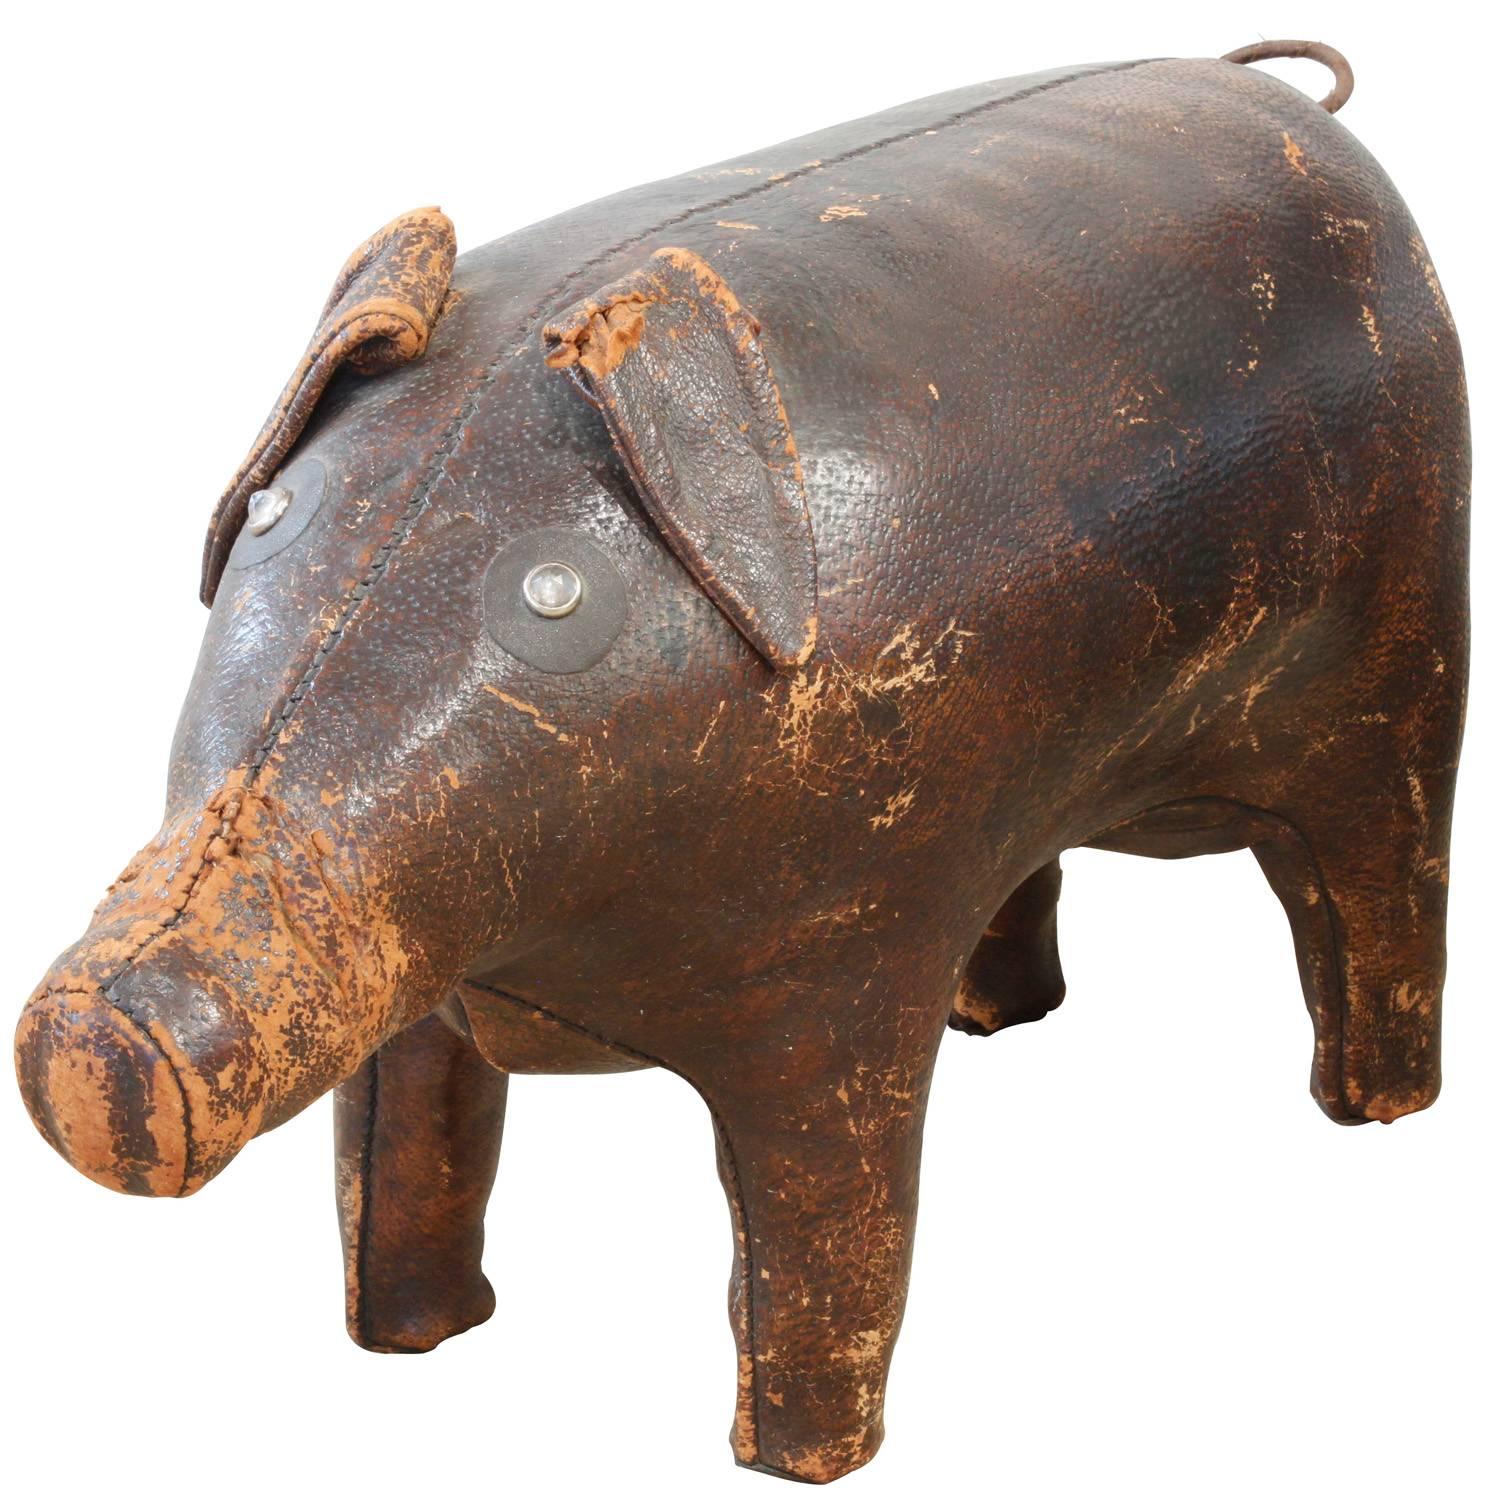 Modern Hand-Stitched A&F Leather Pig, 1960s For Sale